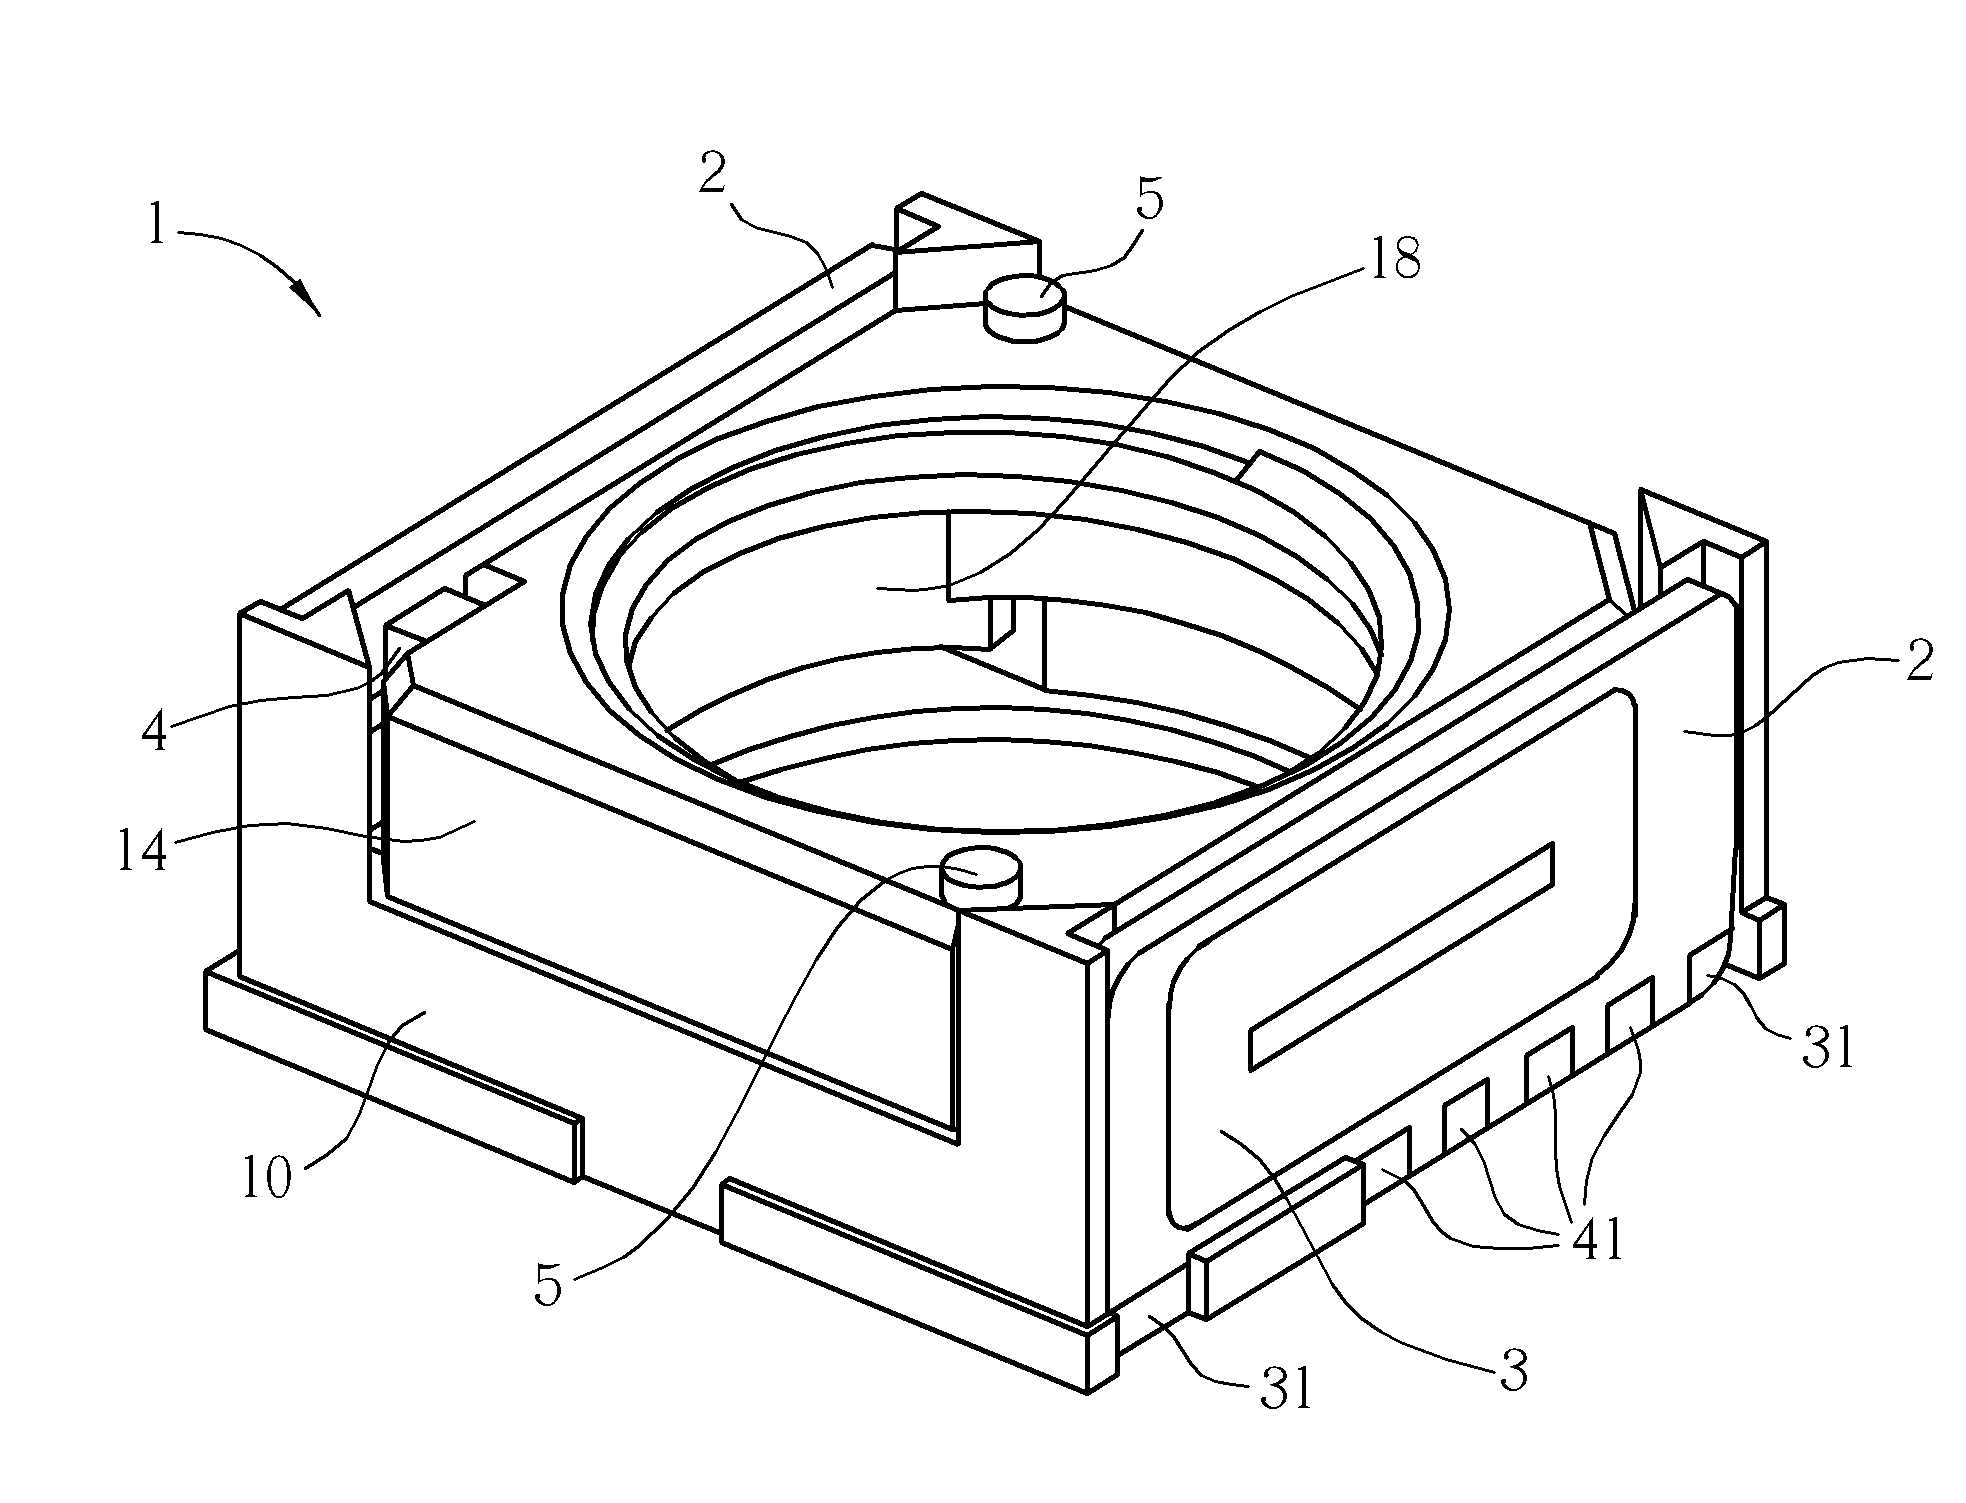 Voice coil motor with surface coil